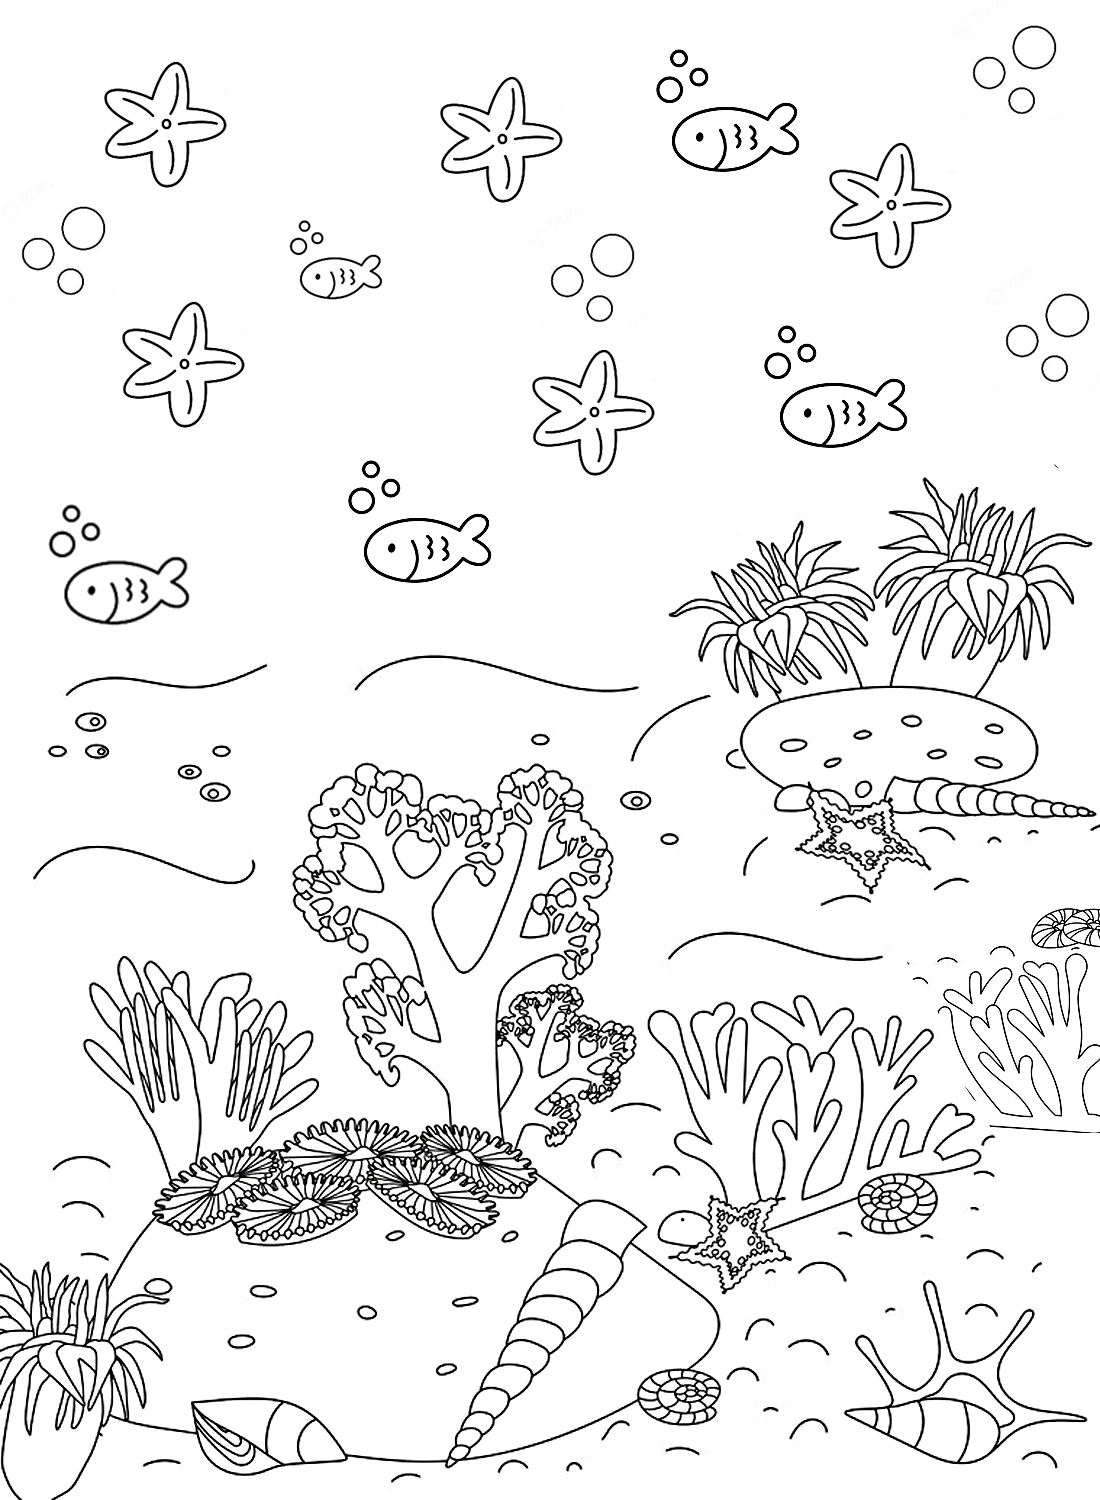 Coral reef from Coral